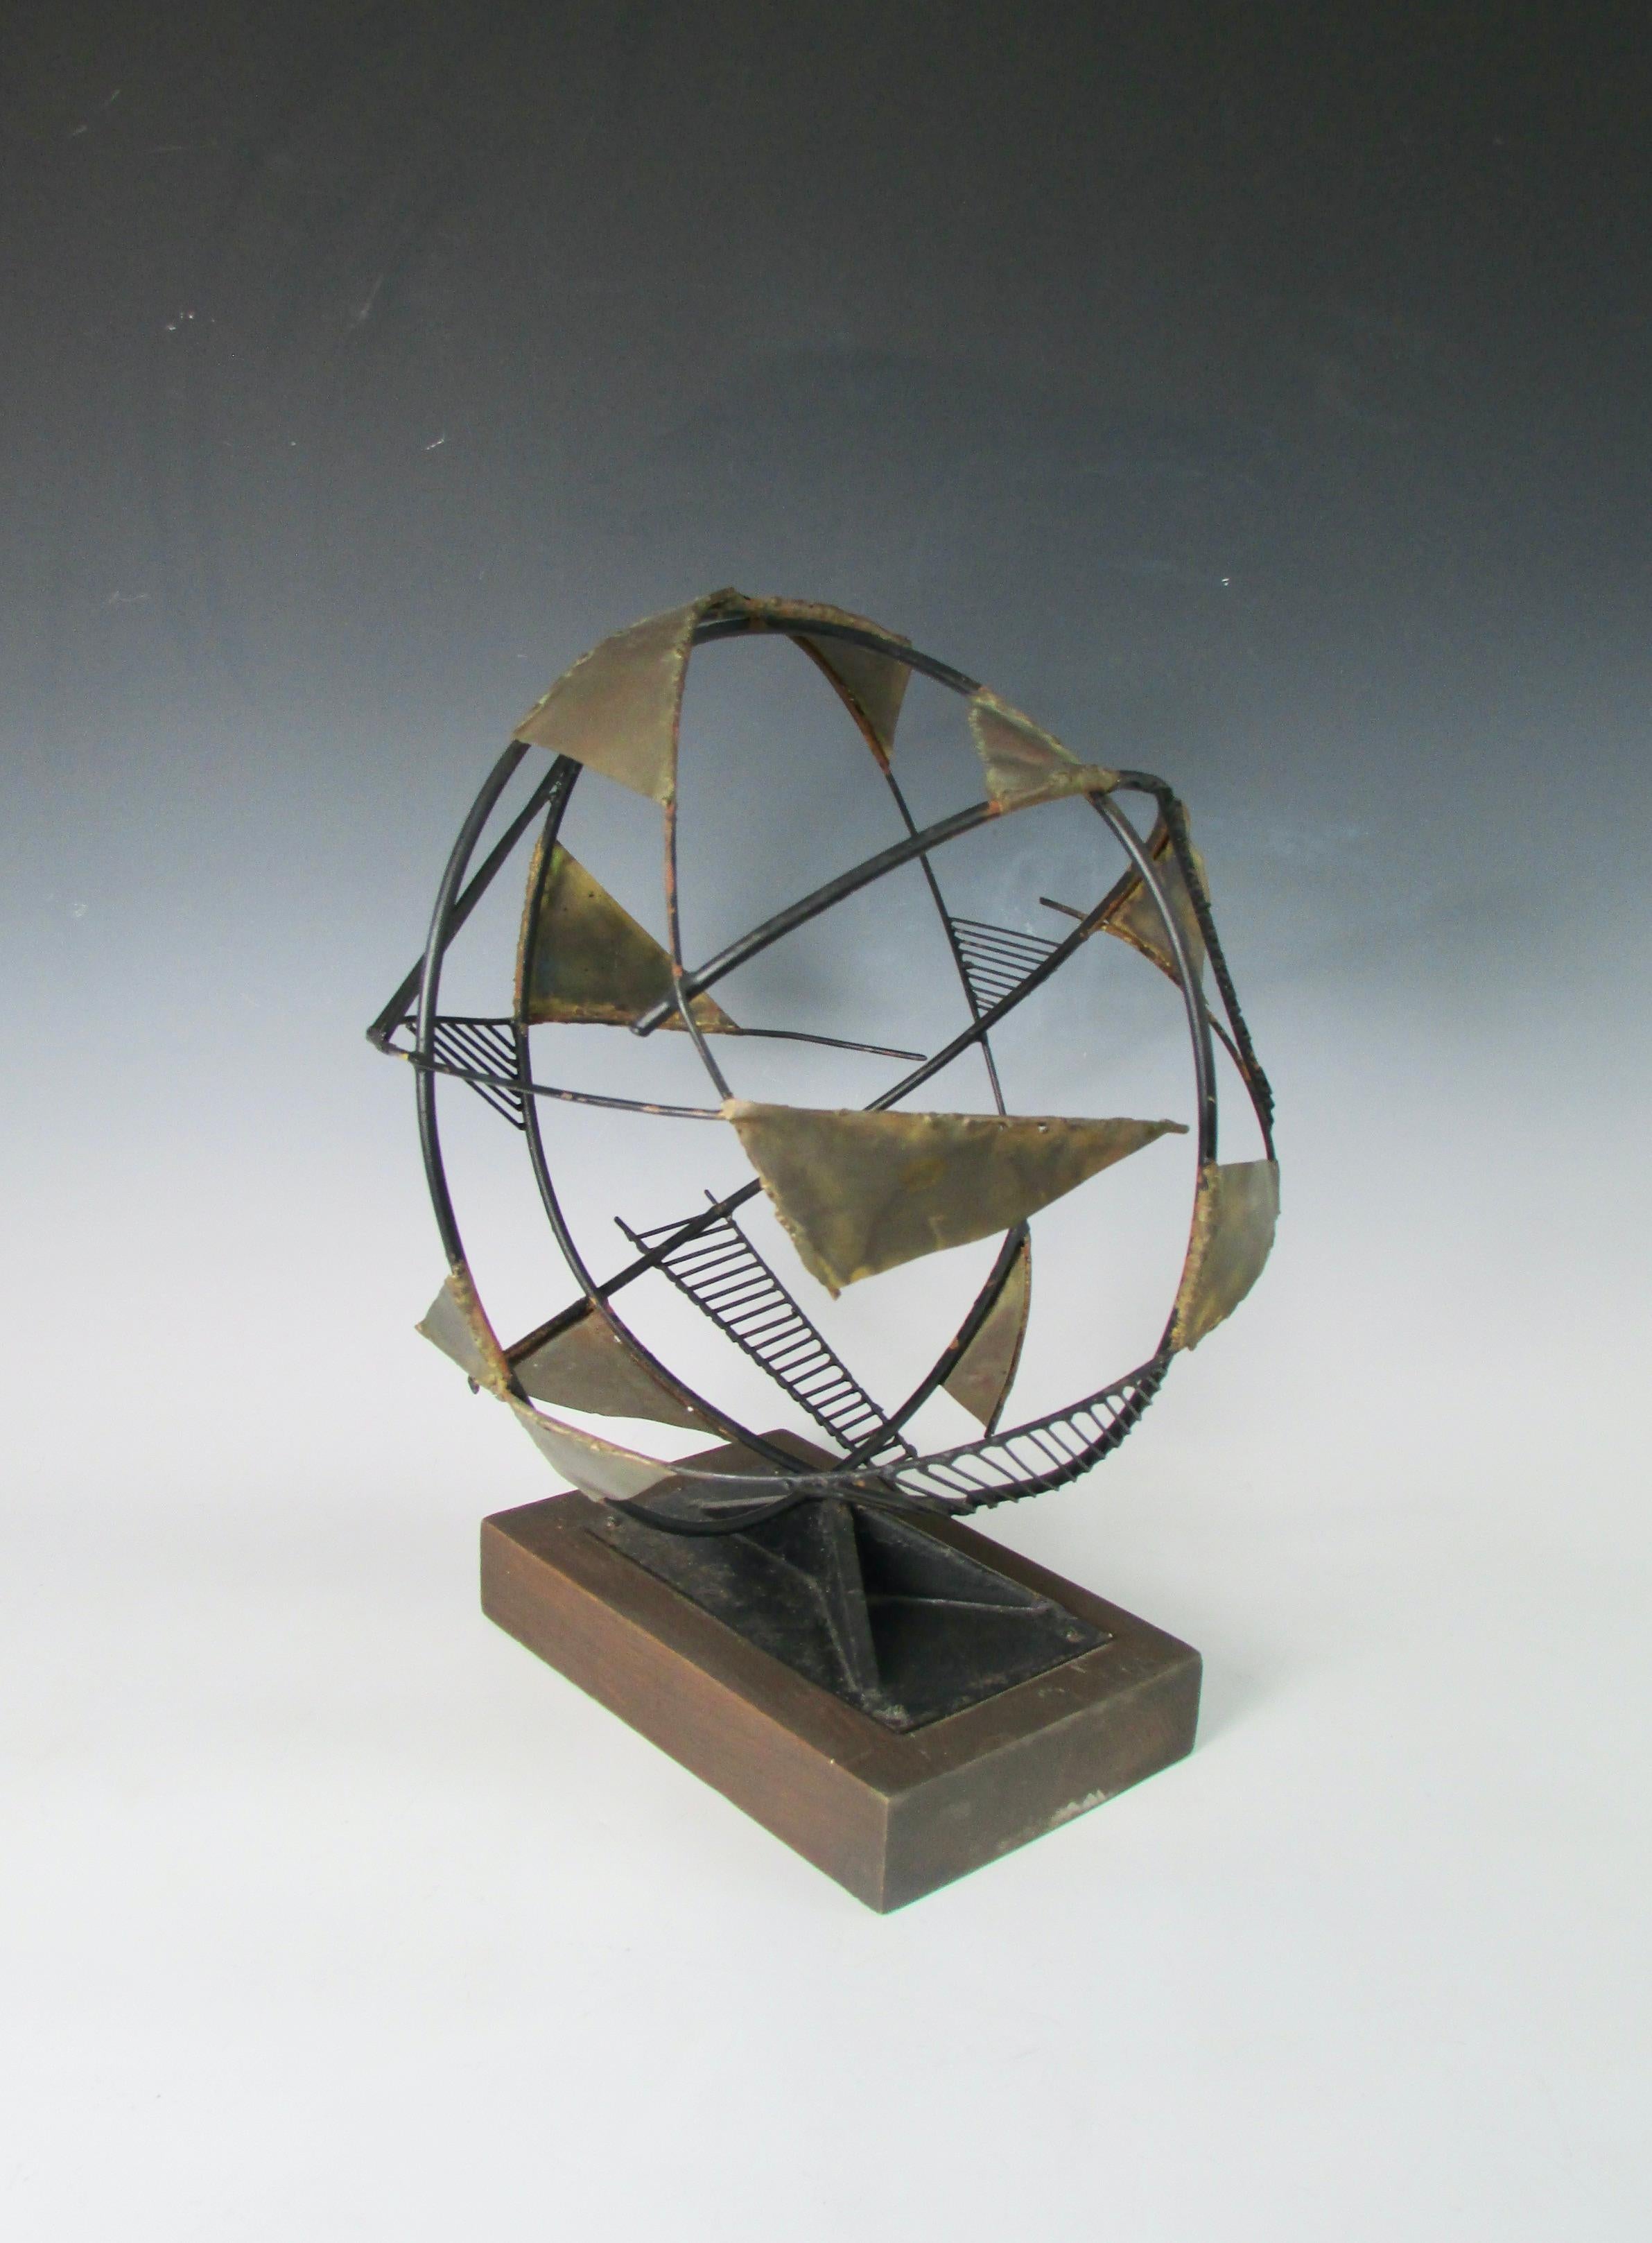 American Table Top Torch Cut and Welded Brutalist Skeleton Sphere Sculpture For Sale